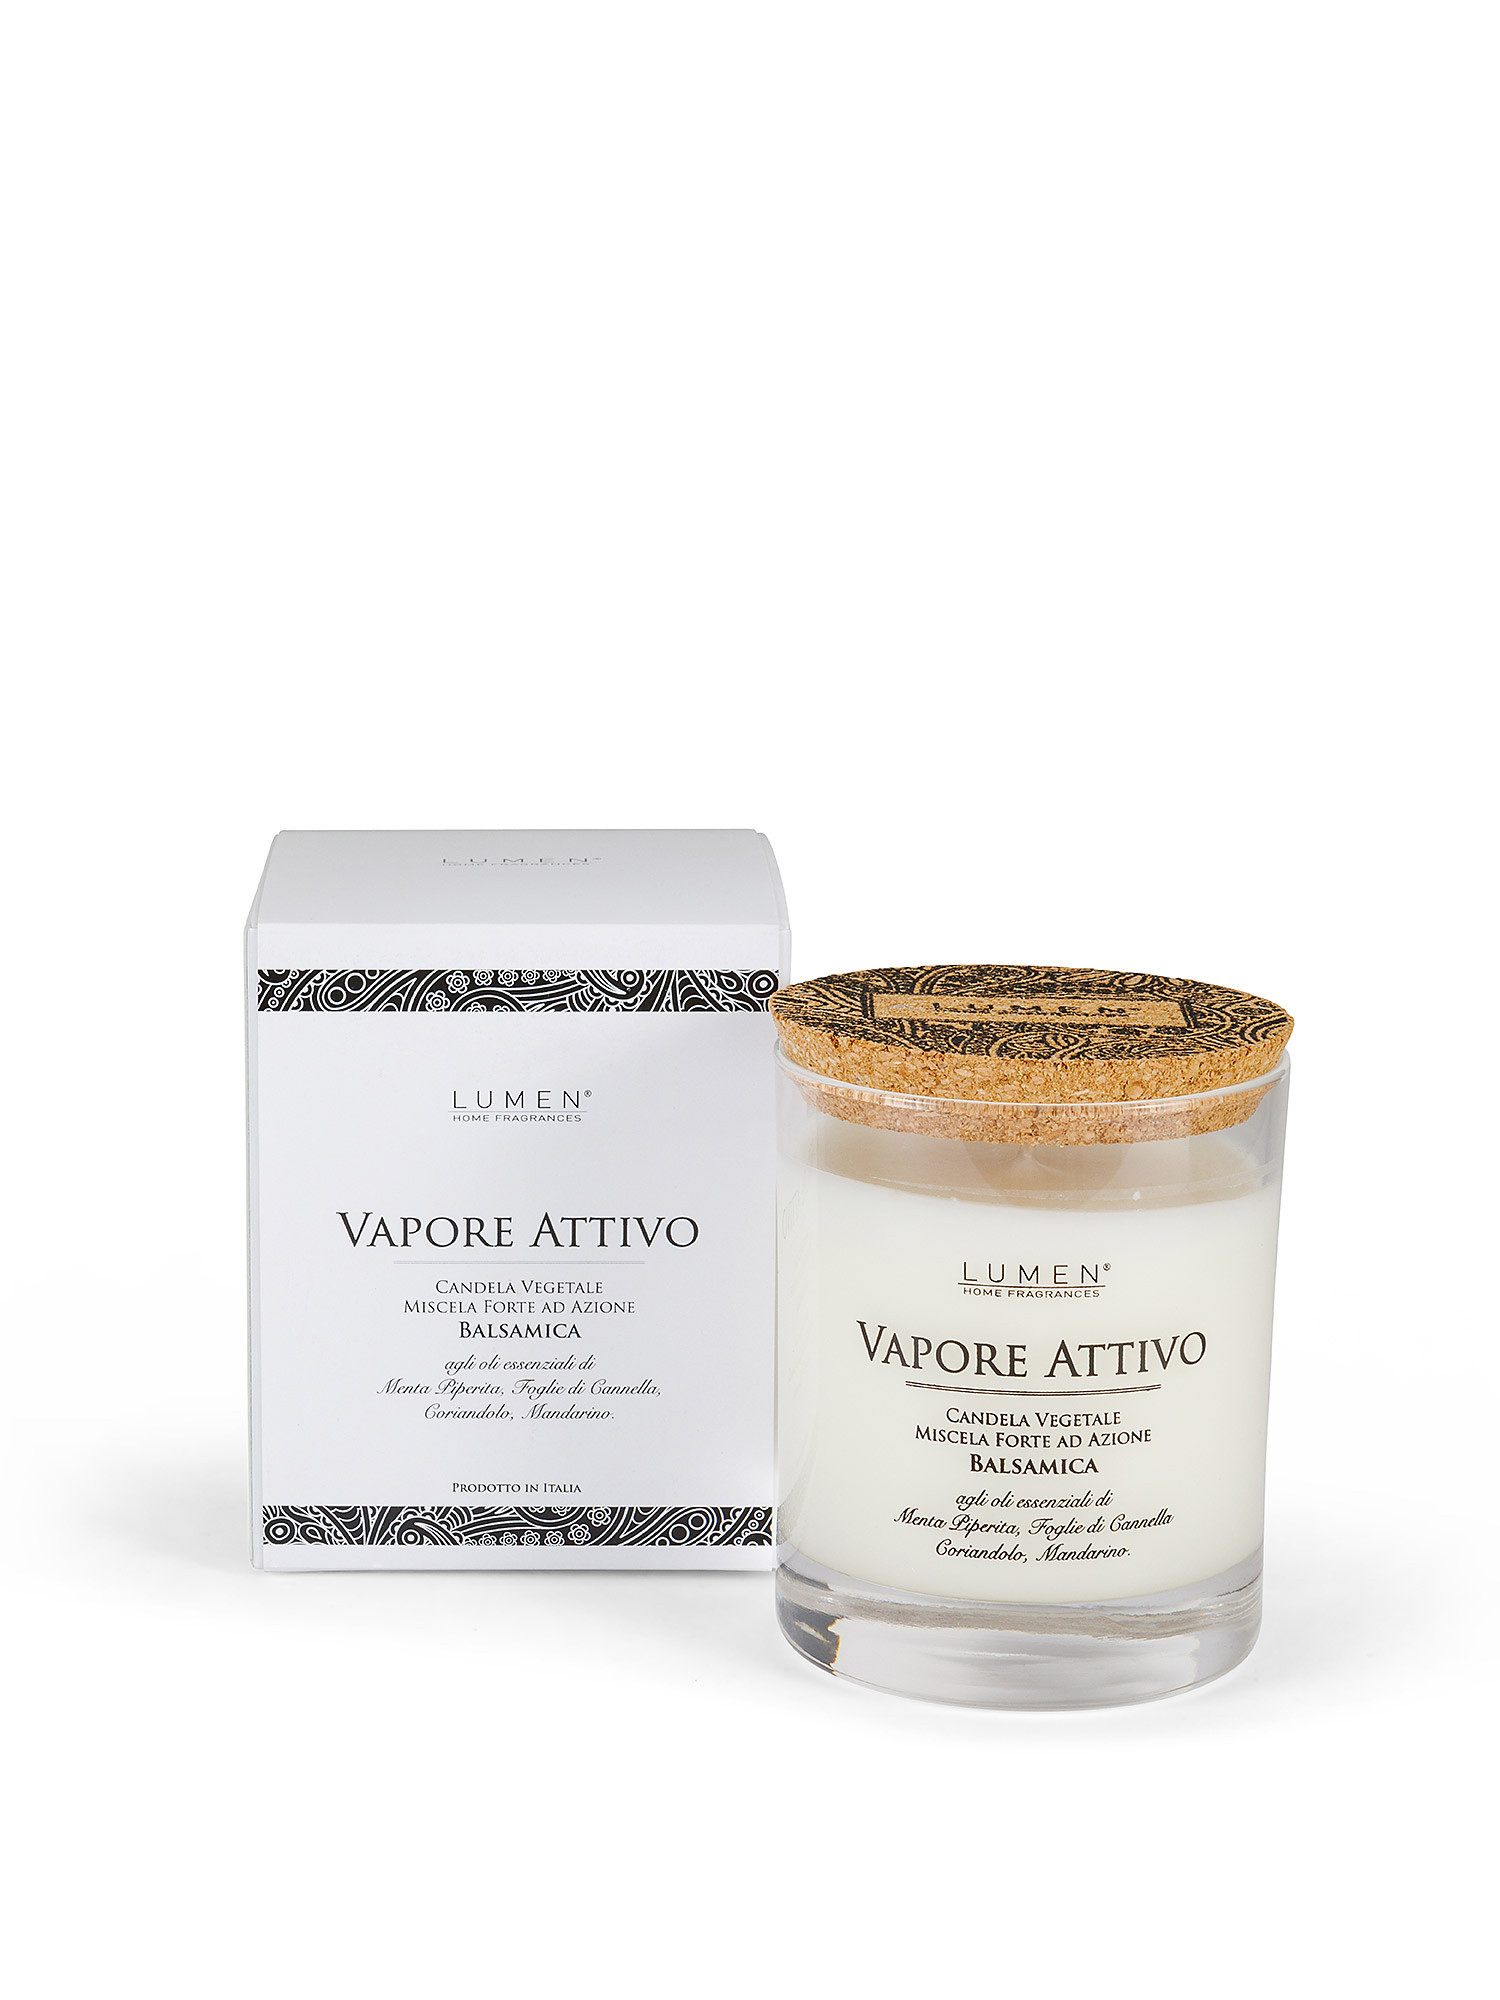 Balsamic active vapor vegetable candle, White, large image number 0